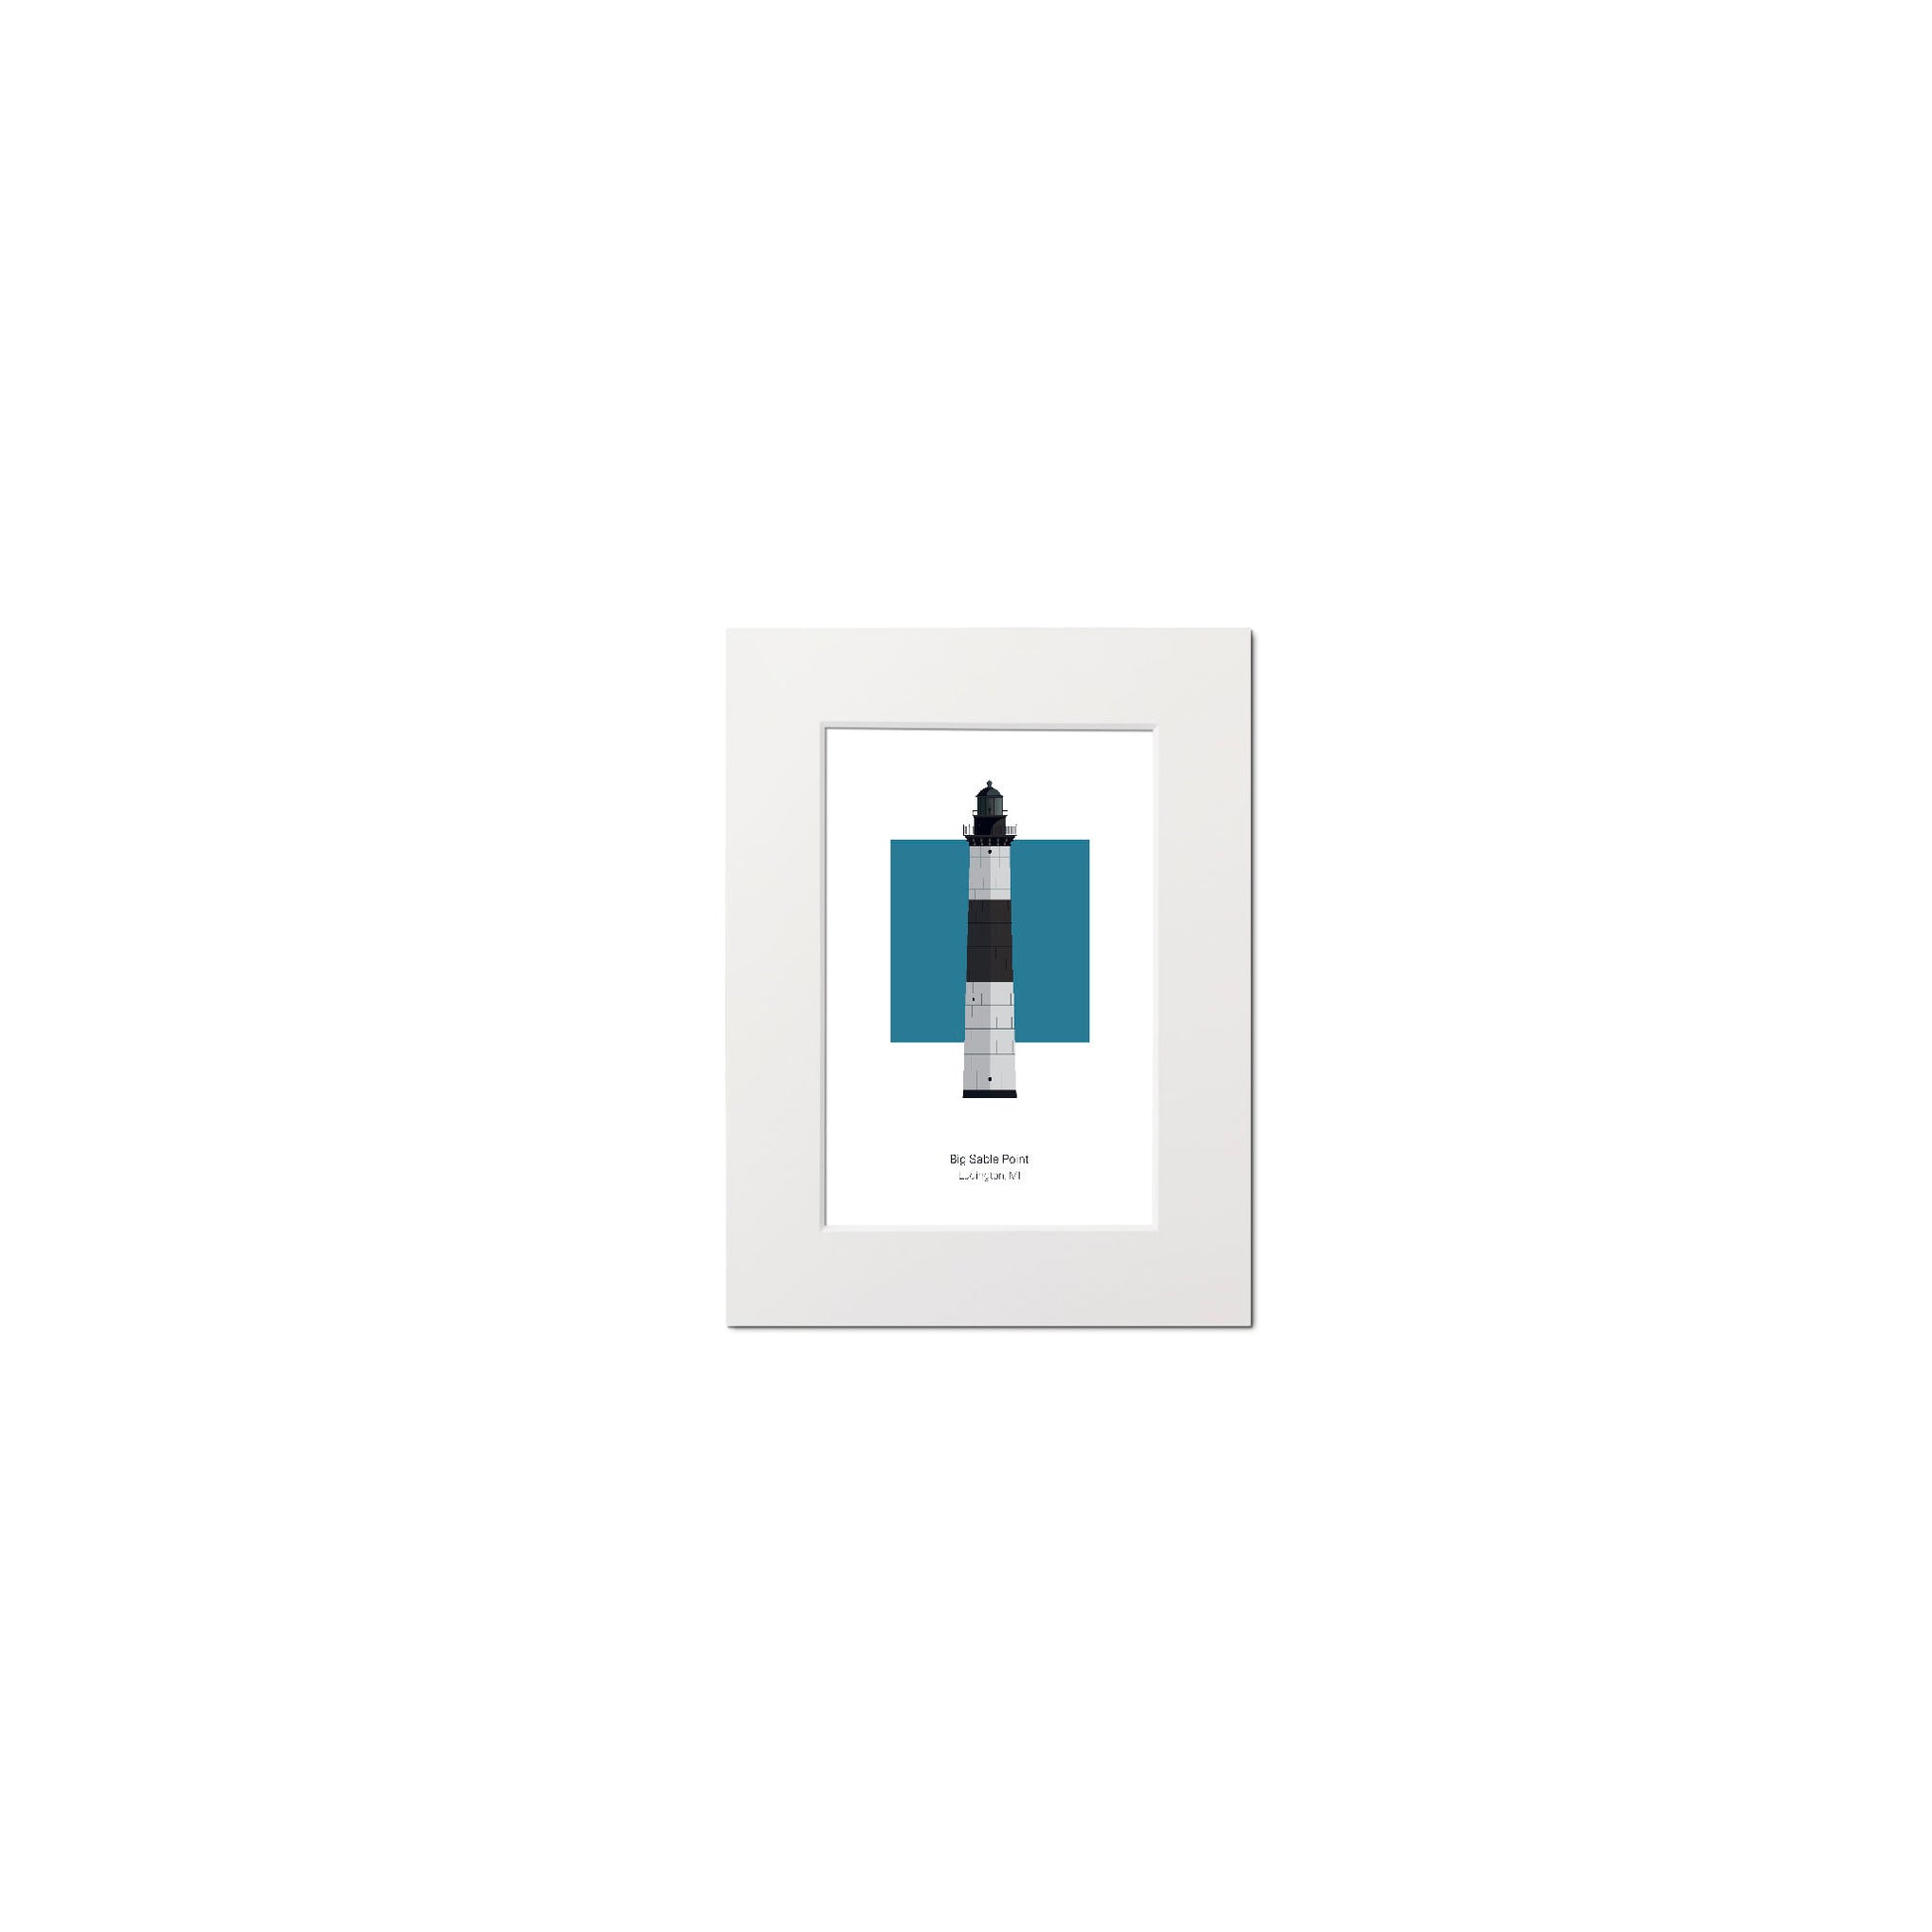 Illustration of the Big Sable Point lighthouse, Rhode Island, USA. On a white background with aqua blue square as a backdrop., mounted and measuring 6"x8" (15x20cm).